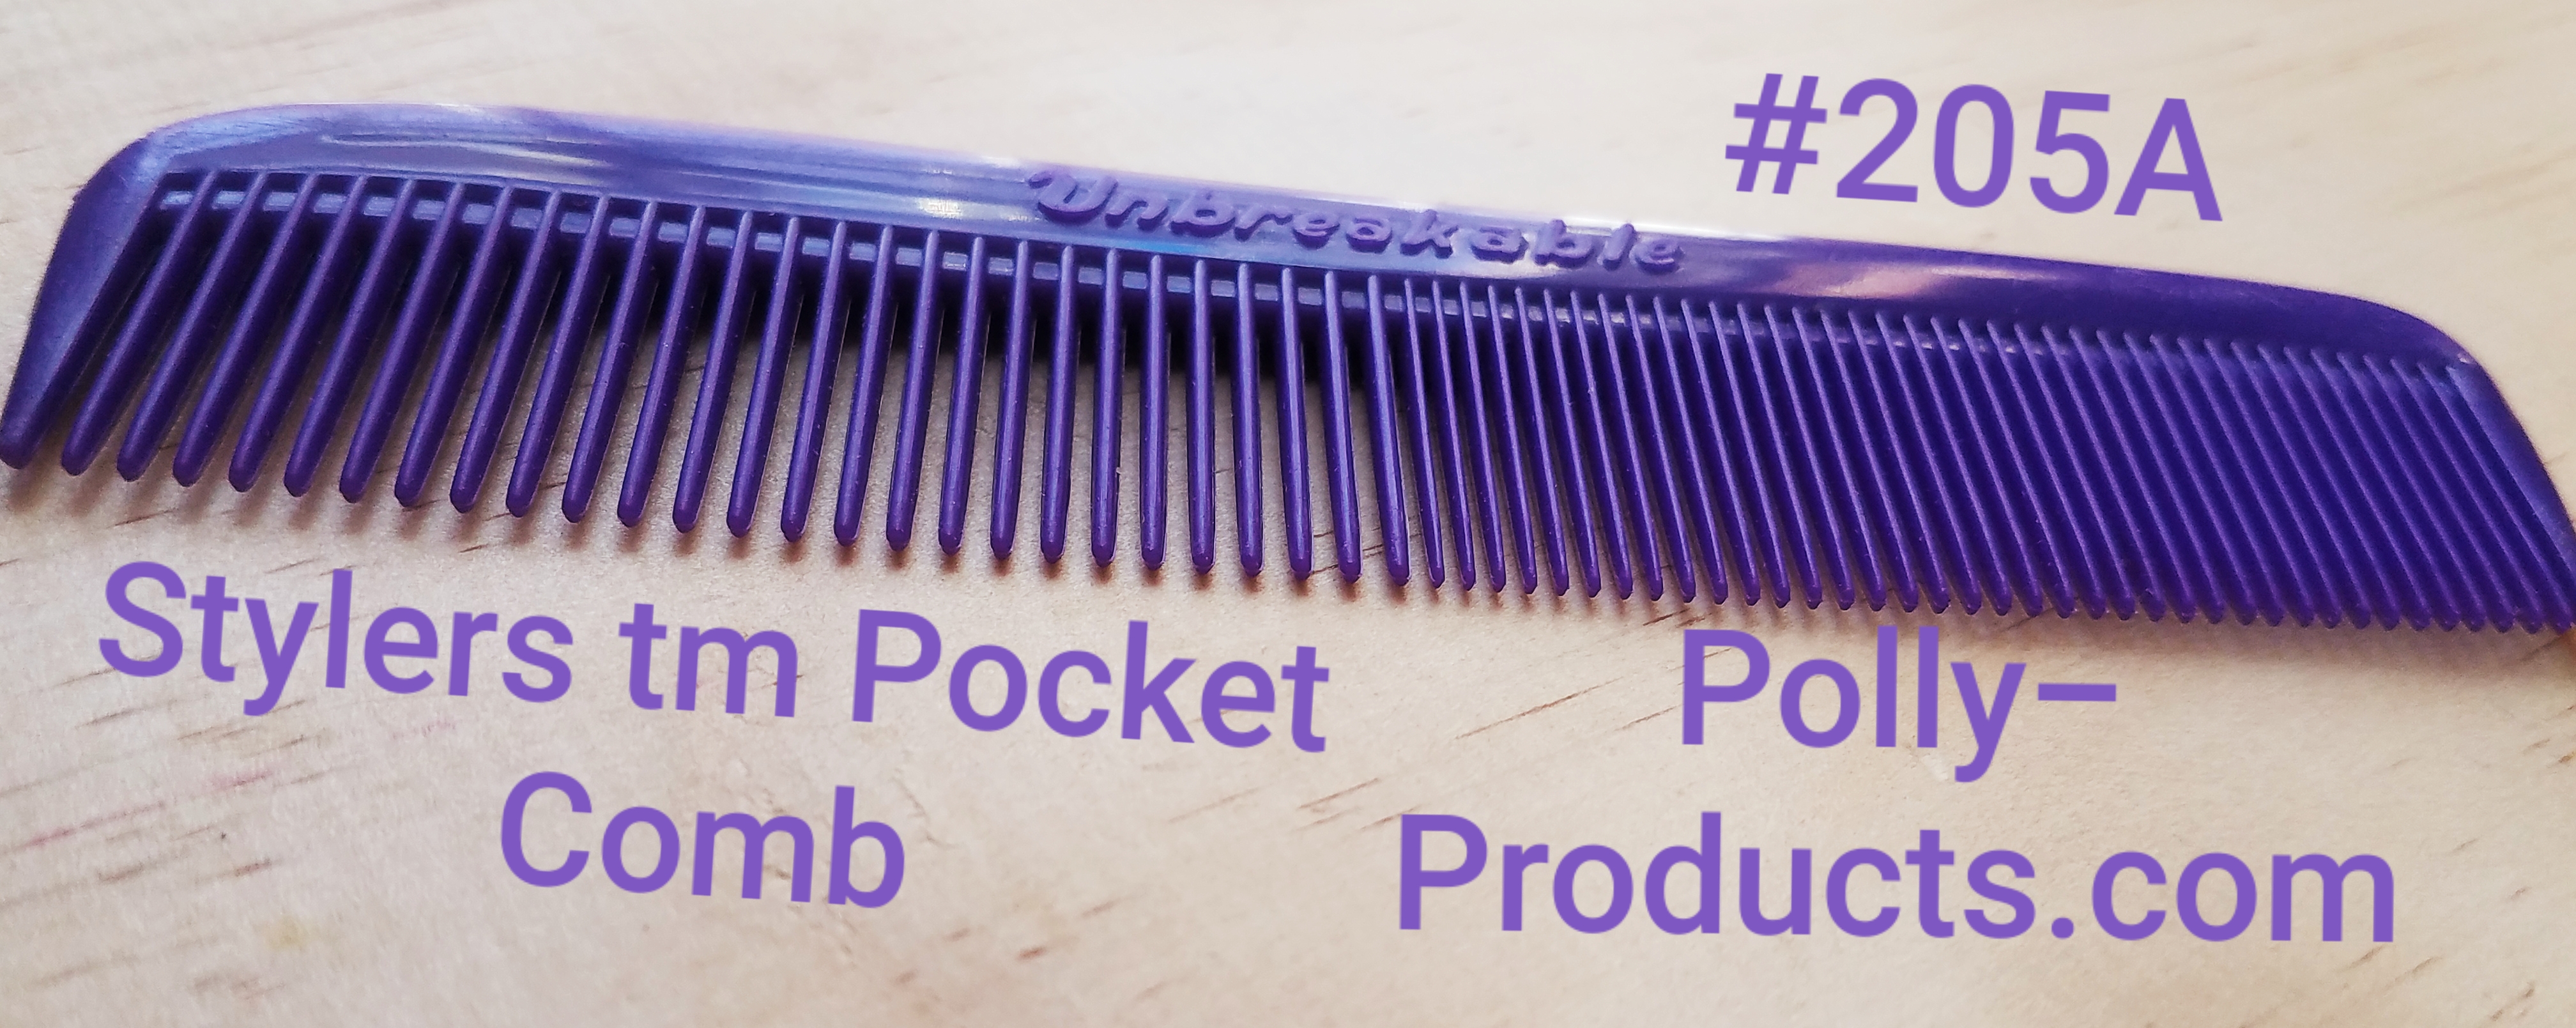 #205A STYLERS tm POCKET COMB FROM POLLY PRODUCTS COMPANY / BARBER PRO tm